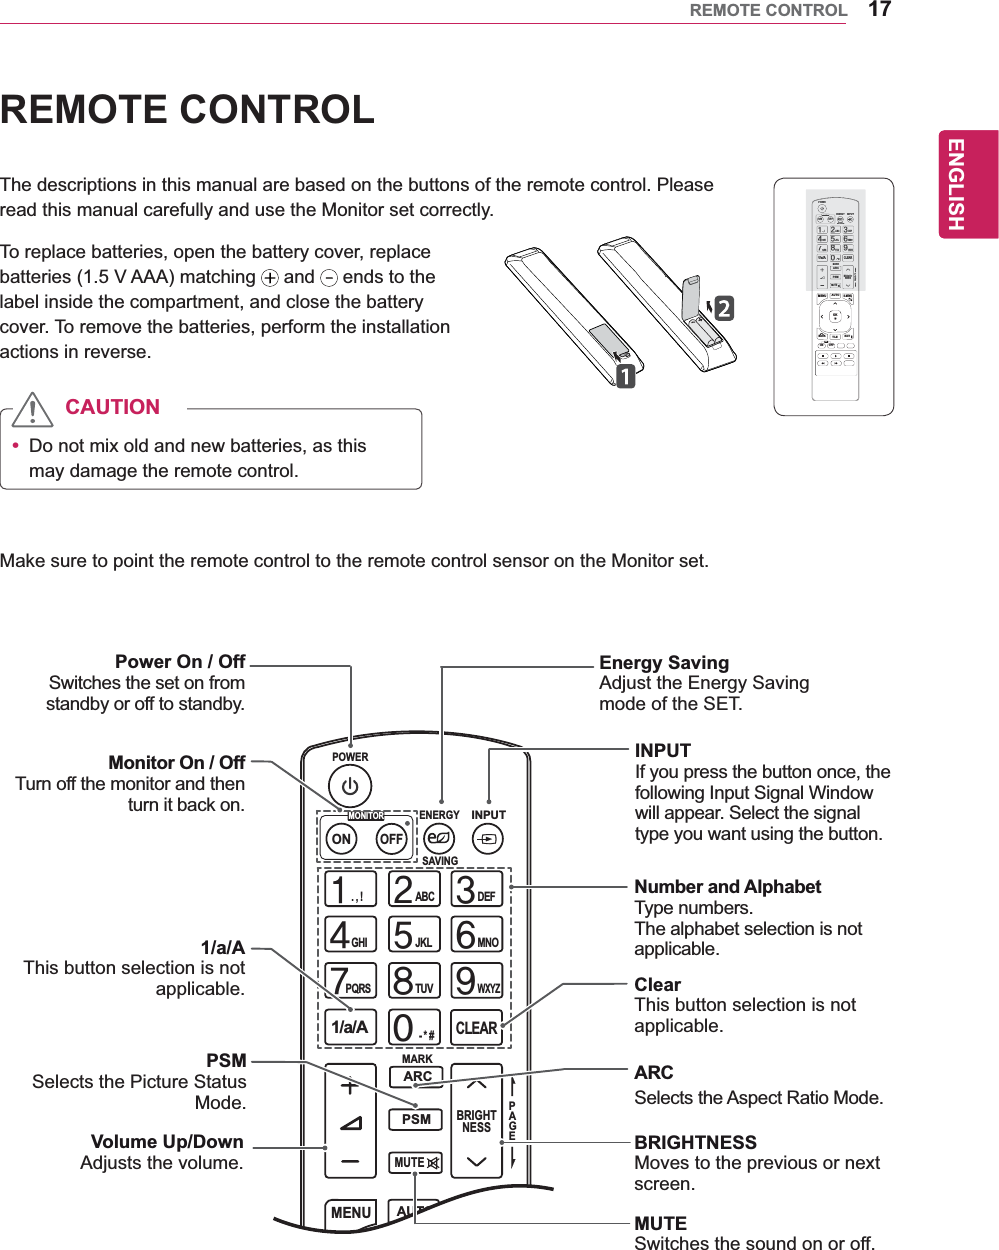 17ENGENGLISHREMOTE CONTROLREMOTE CONTROLThe descriptions in this manual are based on the buttons of the remote control. Please read this manual carefully and use the Monitor set correctly.To replace batteries, open the battery cover, replace batteries (1.5 V AAA) matching   and   ends to the label inside the compartment, and close the battery cover. To remove the batteries, perform the installation actions in reverse.Make sure to point the remote control to the remote control sensor on the Monitor set.CAUTIONy Do not mix old and new batteries, as this may damage the remote control.PAGEINPUTENERGYSAVINGMARKARCONOFF. , !ABCDEFGHIJKLMNOPQRSTUV1/a/A- * #WXYZCLEAROKS.MENUMONITORPSMAUTOMUTEBRIGHTNESSMENUIDBACK TILEON OFFEXITPOWERPAGEINPUTENERGYSAVINGMARKARC. , !ABCDEFGHIJKLMNOPQRSTUV1/a/A- * #WXYZCLEARONOFFMONITORMONITORPSMMUTEBRIGHTNESSPOWERPAGEINPUTENERGYSAVINGMARKARCONOFF. , !ABCDEFGHIJKLMNOPQRSTUV1/a/A- * #WXYZCLEARS.MENUMONITORPSMAUTOMUTEBRIGHTNESSMENUPOWER Power On / Off Switches the set on from standby or off to standby.Monitor On / OffTurn off the monitor and then turn it back on.1/a/A This button selection is not applicable.Energy SavingAdjust the Energy Saving mode of the SET.INPUTIf you press the button once, the following Input Signal Window will appear. Select the signal type you want using the button.Number and AlphabetType numbers.The alphabet selection is not applicable. ClearThis button selection is not applicable.PSMSelects the Picture Status Mode.Volume Up/DownAdjusts the volume.ARCSelects the Aspect Ratio Mode.BRIGHTNESSMoves to the previous or next screen.MUTESwitches the sound on or off.